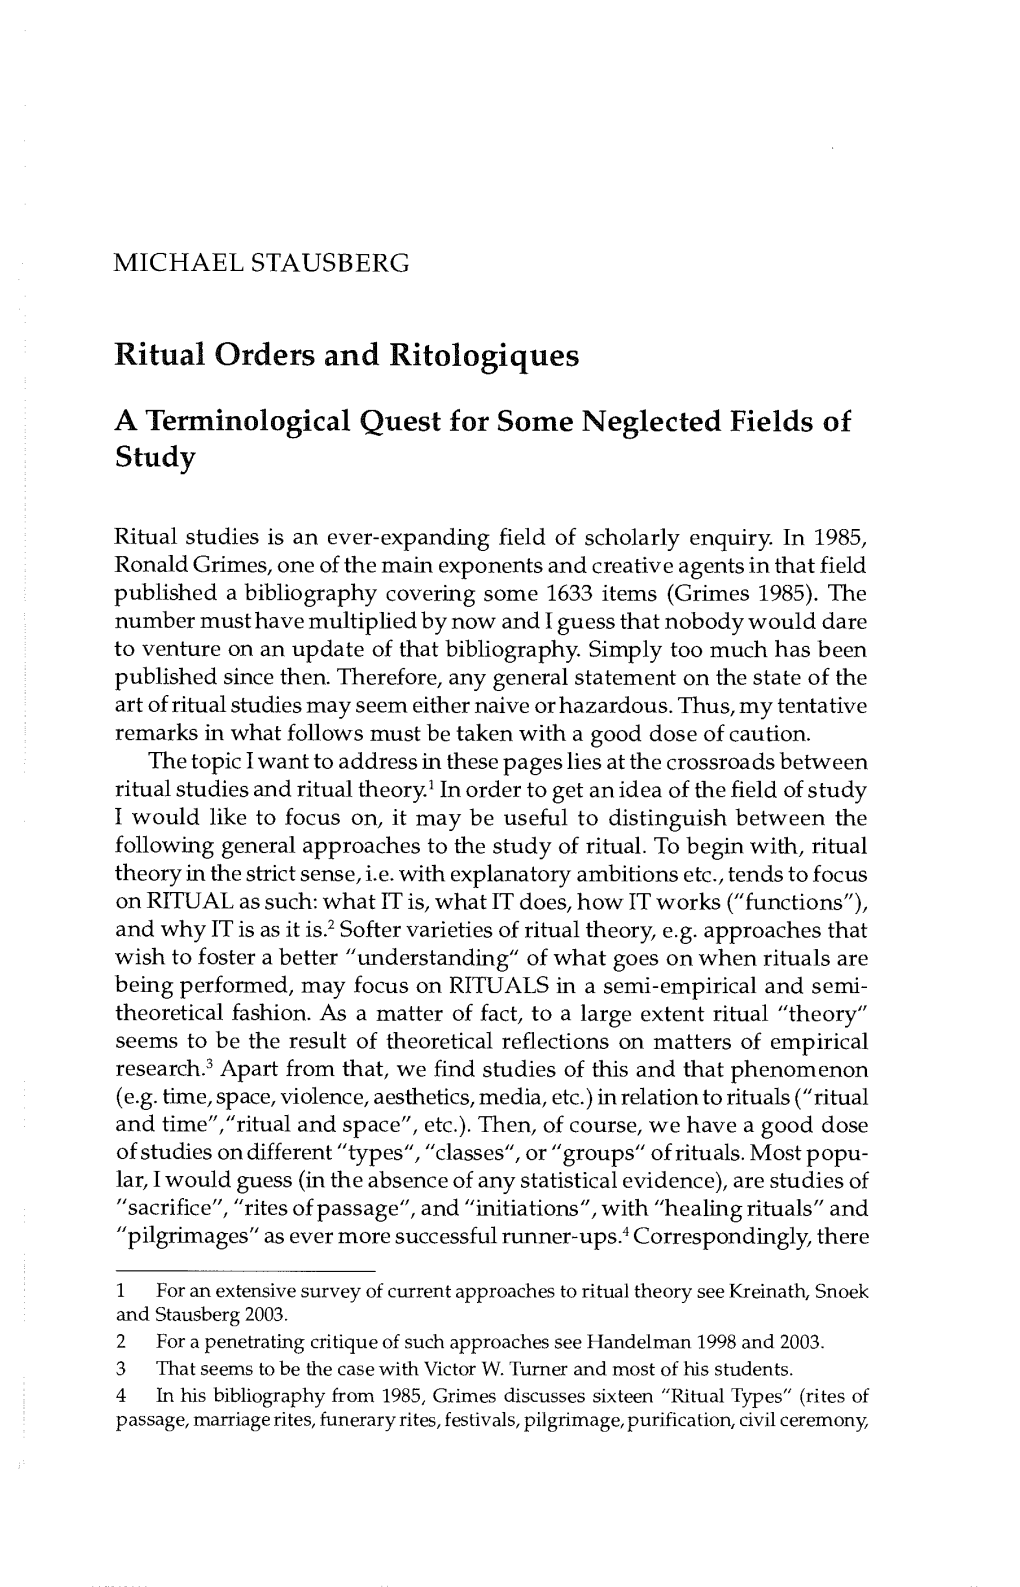 Ritual Orders and Ritologiques a Terminological Quest for Some Neglected Fields of Study